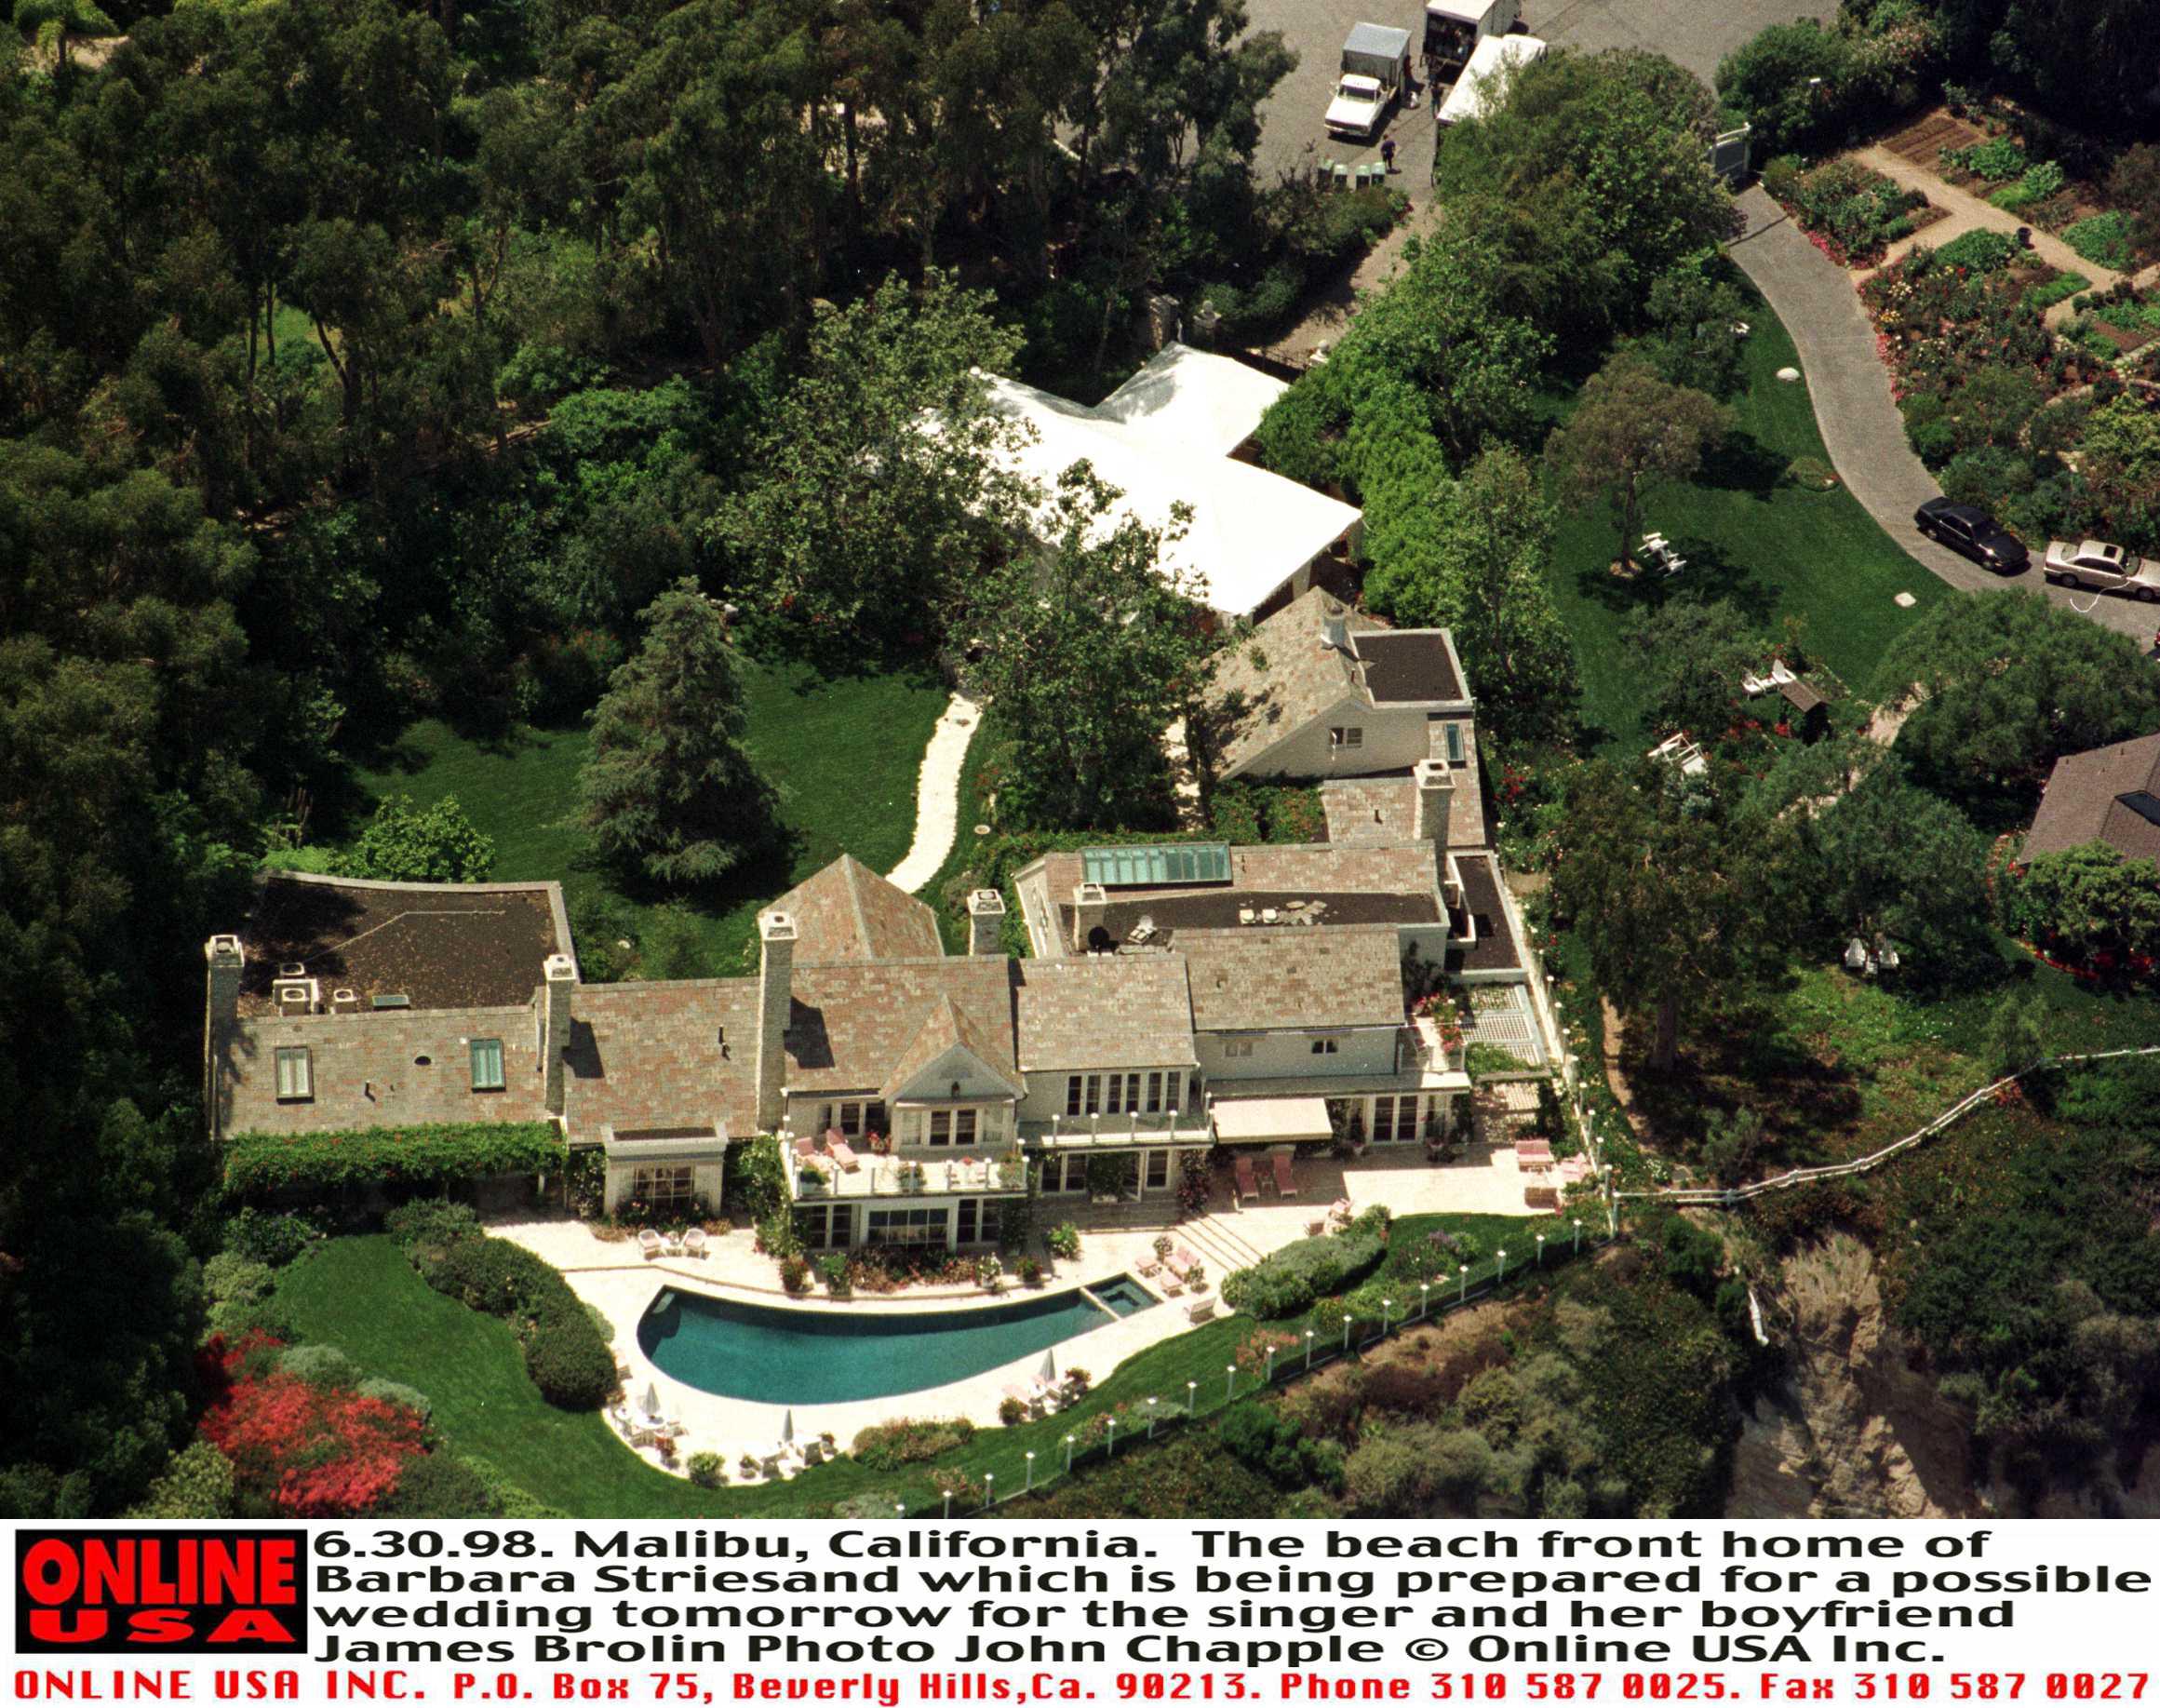 Barbra Streisand's home as captured on June 30, 1998 in Malibu, California | Source: Getty Images